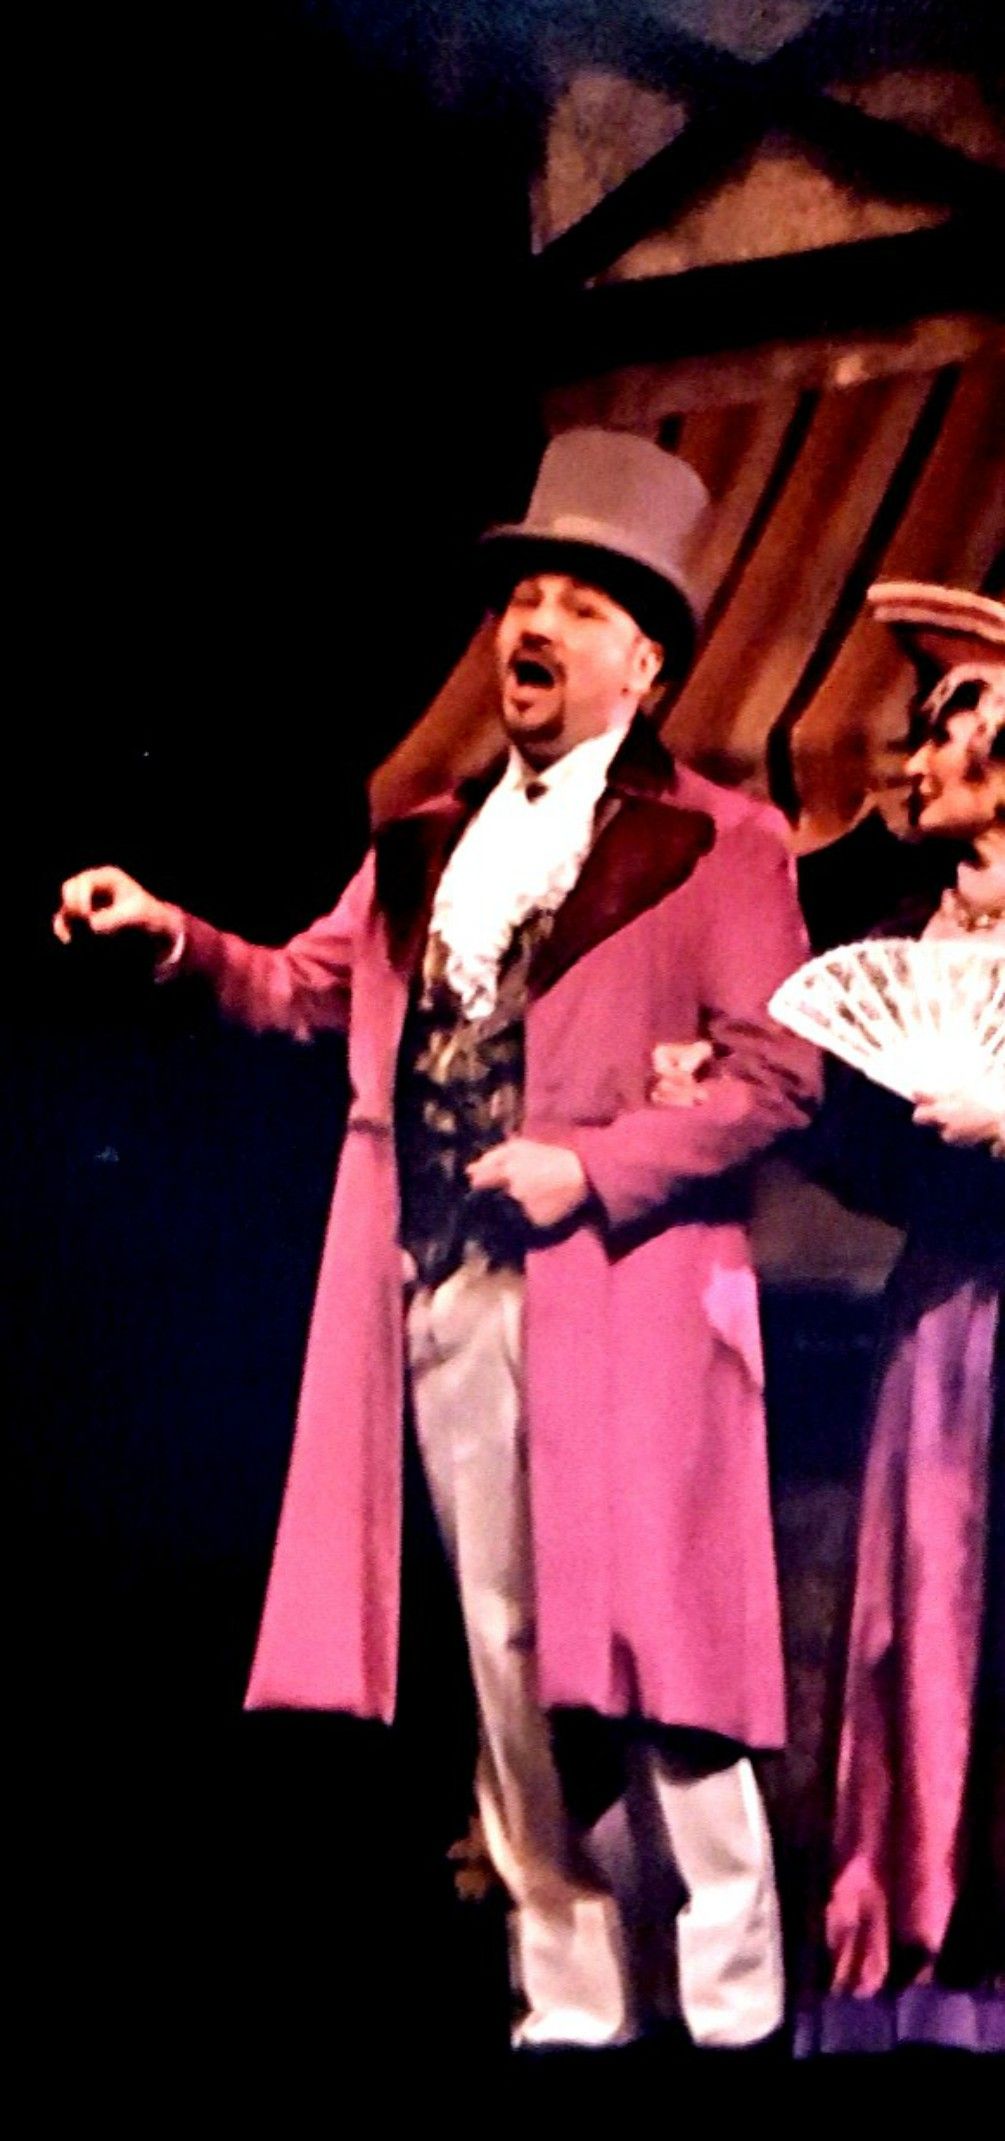 Philip Paul Kelly in a scene from the musical "Beauty and the Beast."